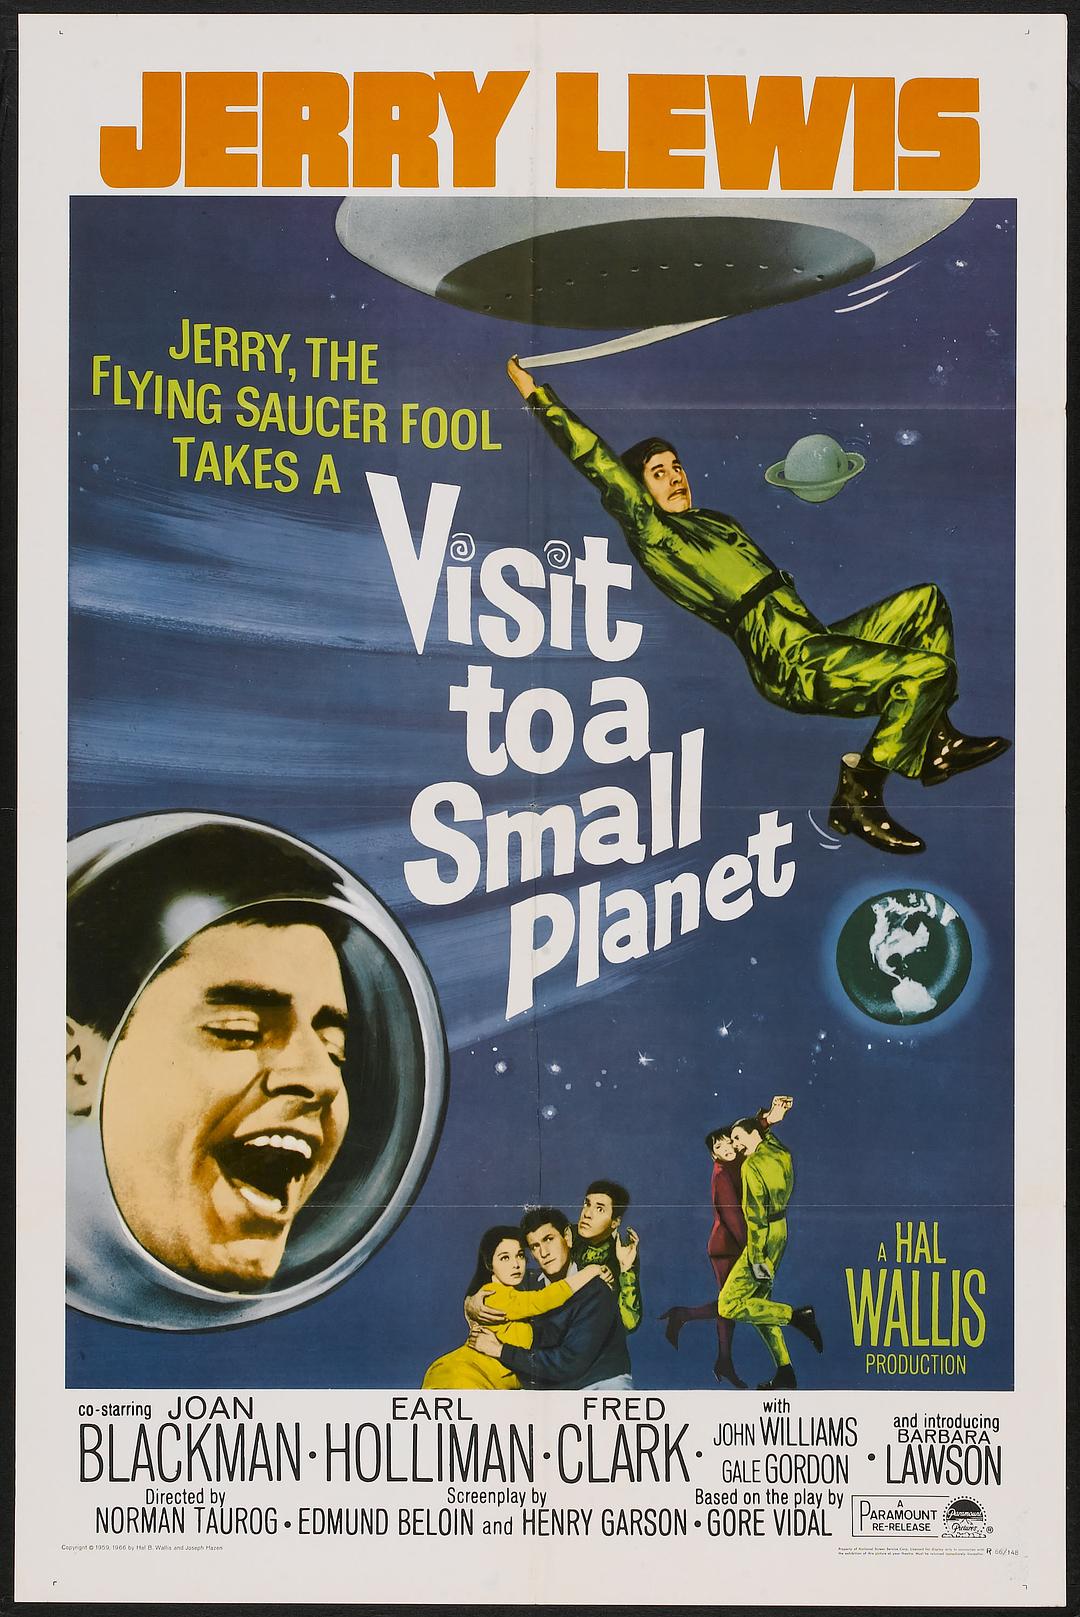  Visit.to.a.Small.Planet.1960.1080p.BluRay.REMUX.AVC.DTS-HD.MA.2.0-FGT 15.40-1.png